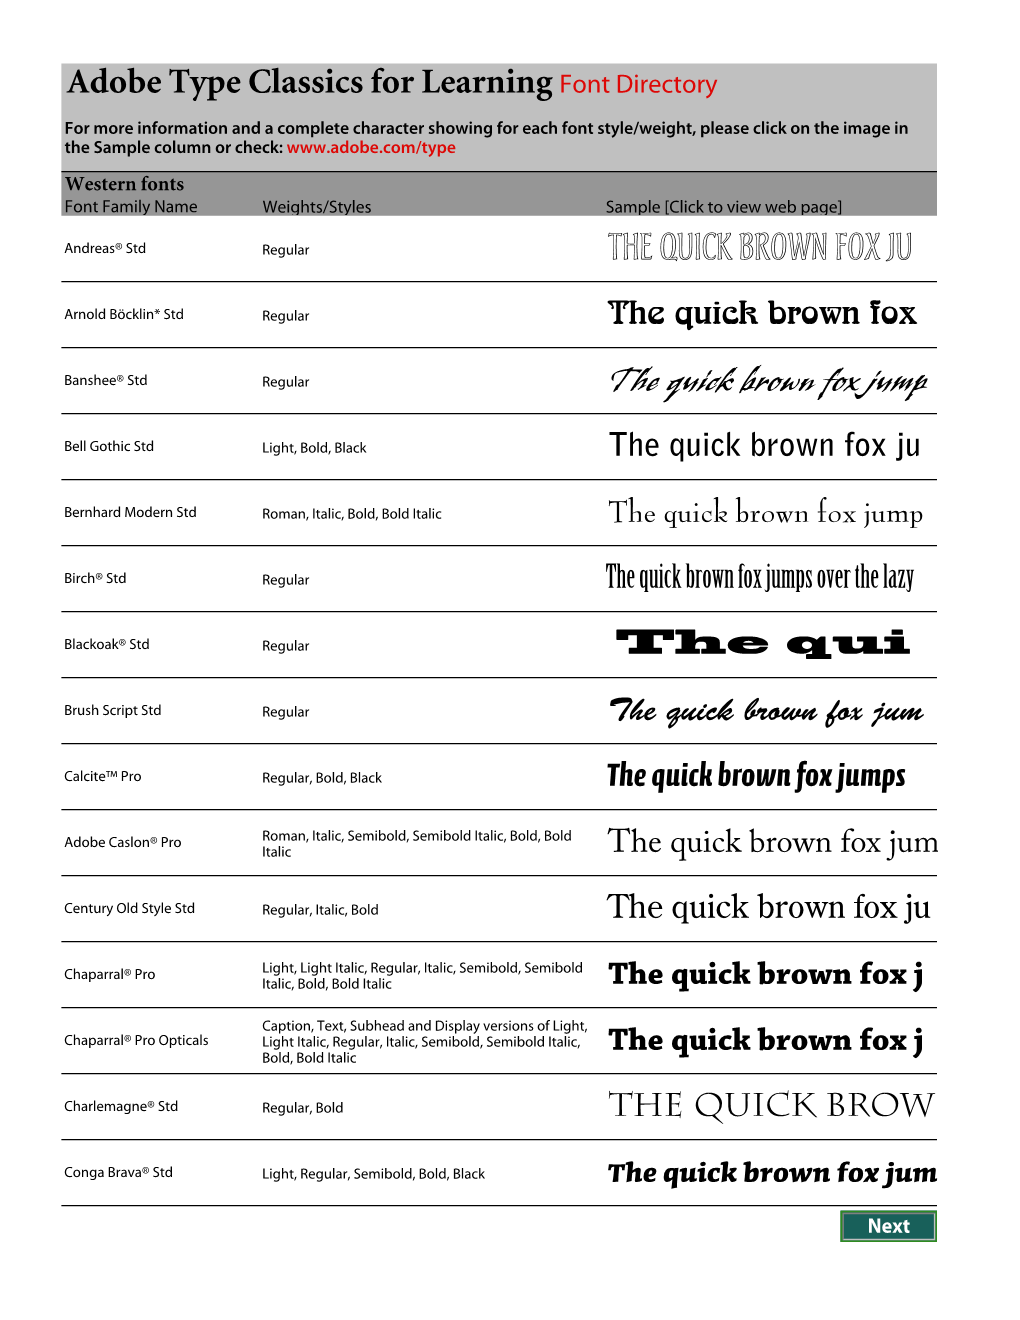 Adobe Type Classics for Learning Font Directory the Quick Brown Fox Ju